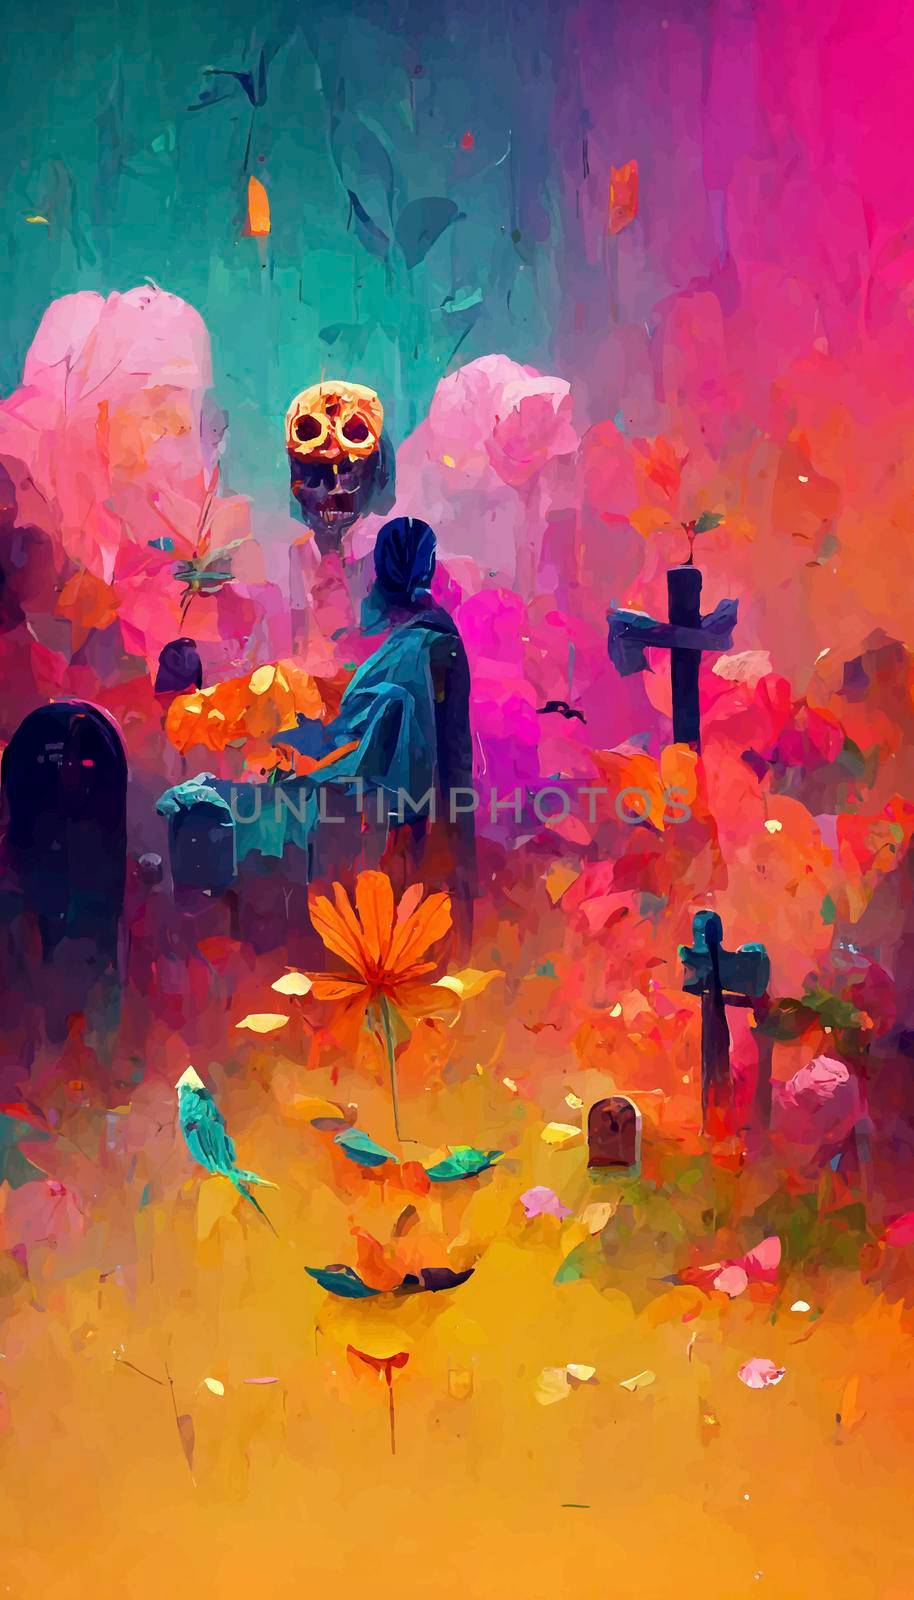 beautiful illustration of the Day of the Dead, Mexican tradition. colorful wallpaper of the day of the dead. catrin/catrina.